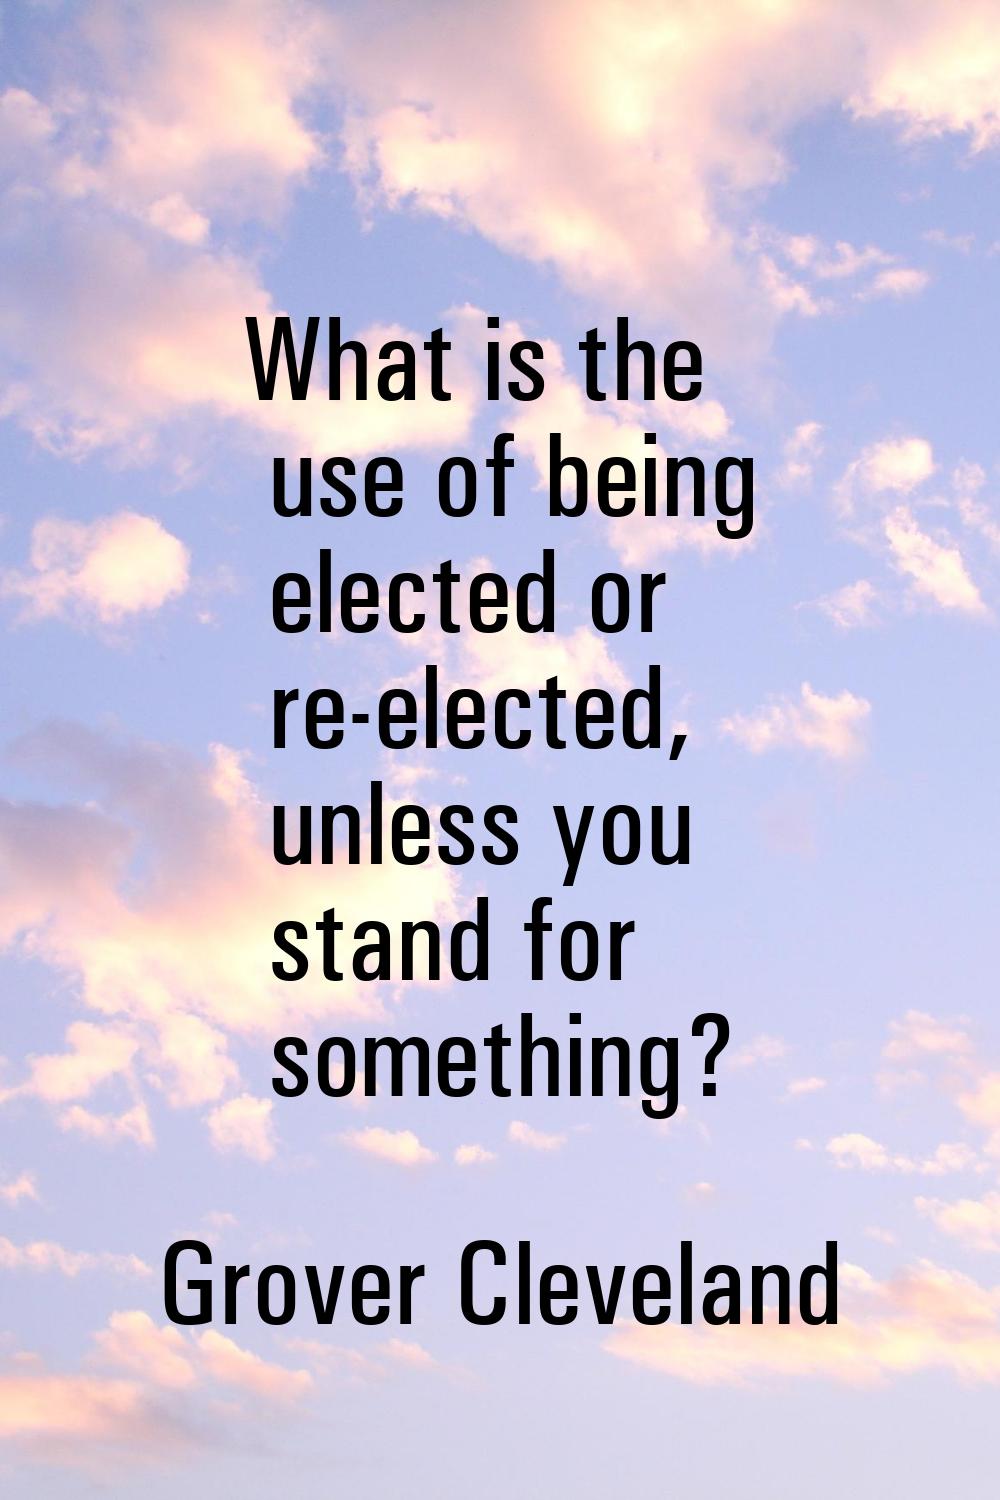 What is the use of being elected or re-elected, unless you stand for something?